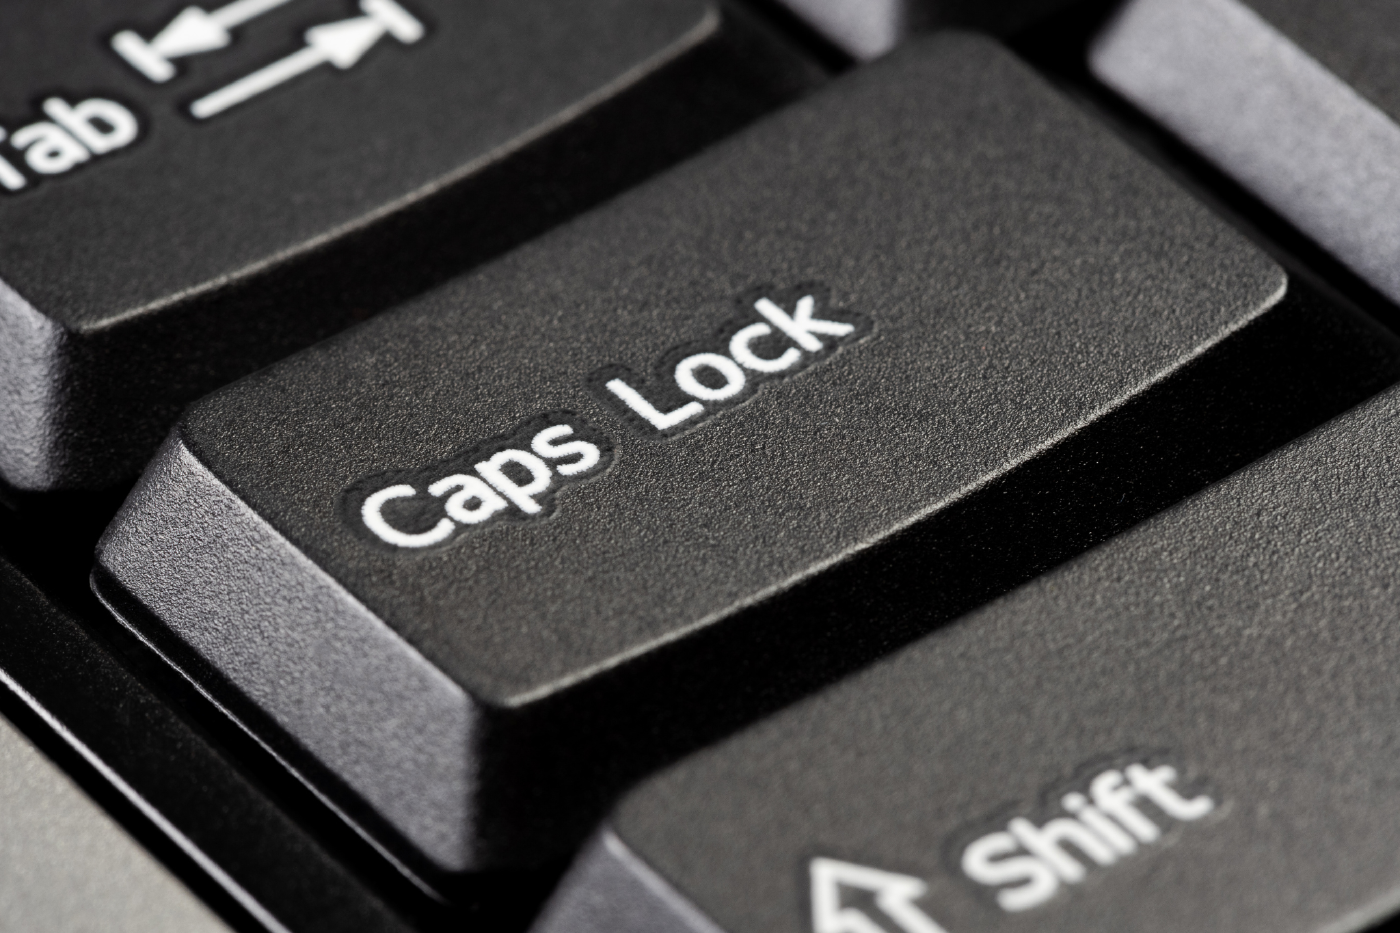 How to Detect If Caps Lock is on With JavaScript